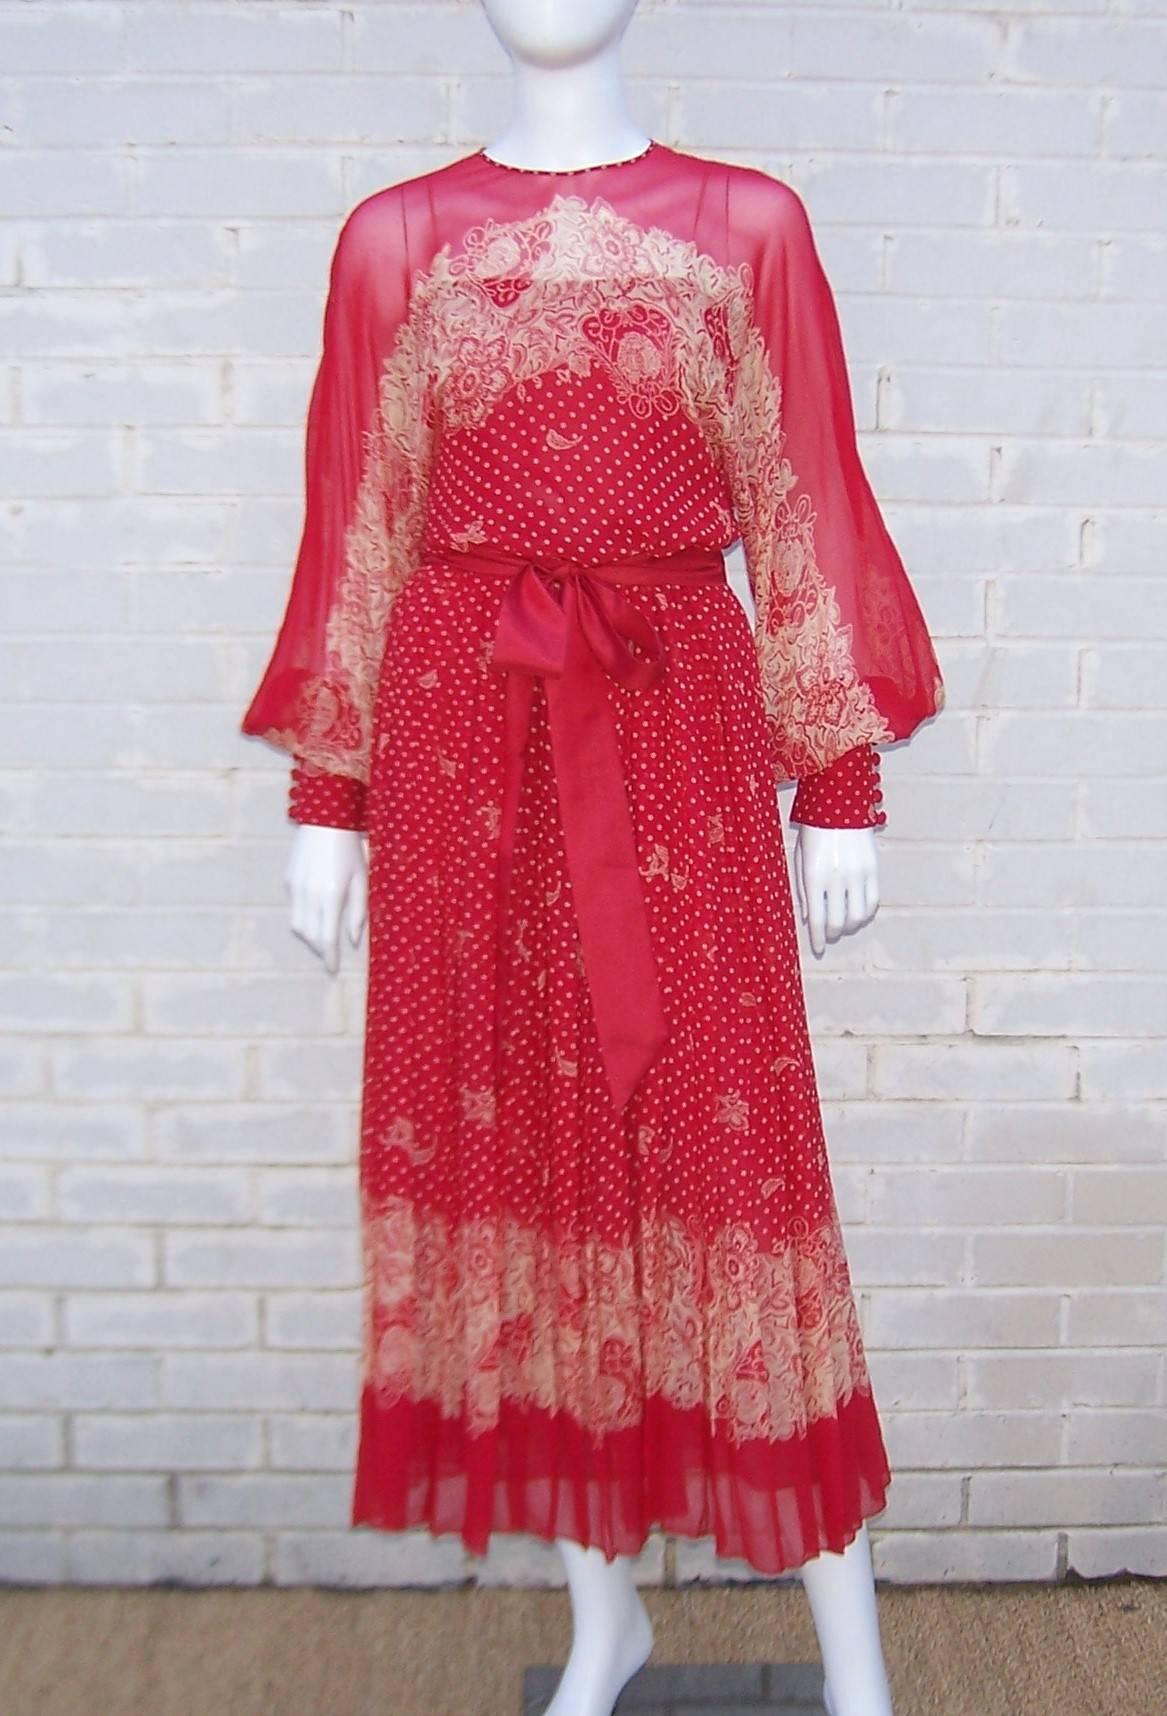 This lovely Adele Simpson design from the 1980's combines a sheer red silk chiffon with a dolman sleeved silhouette for an ethereal dress which can be worn for many different occasions.  The silk chiffon print incorporates polka dots and a trompe